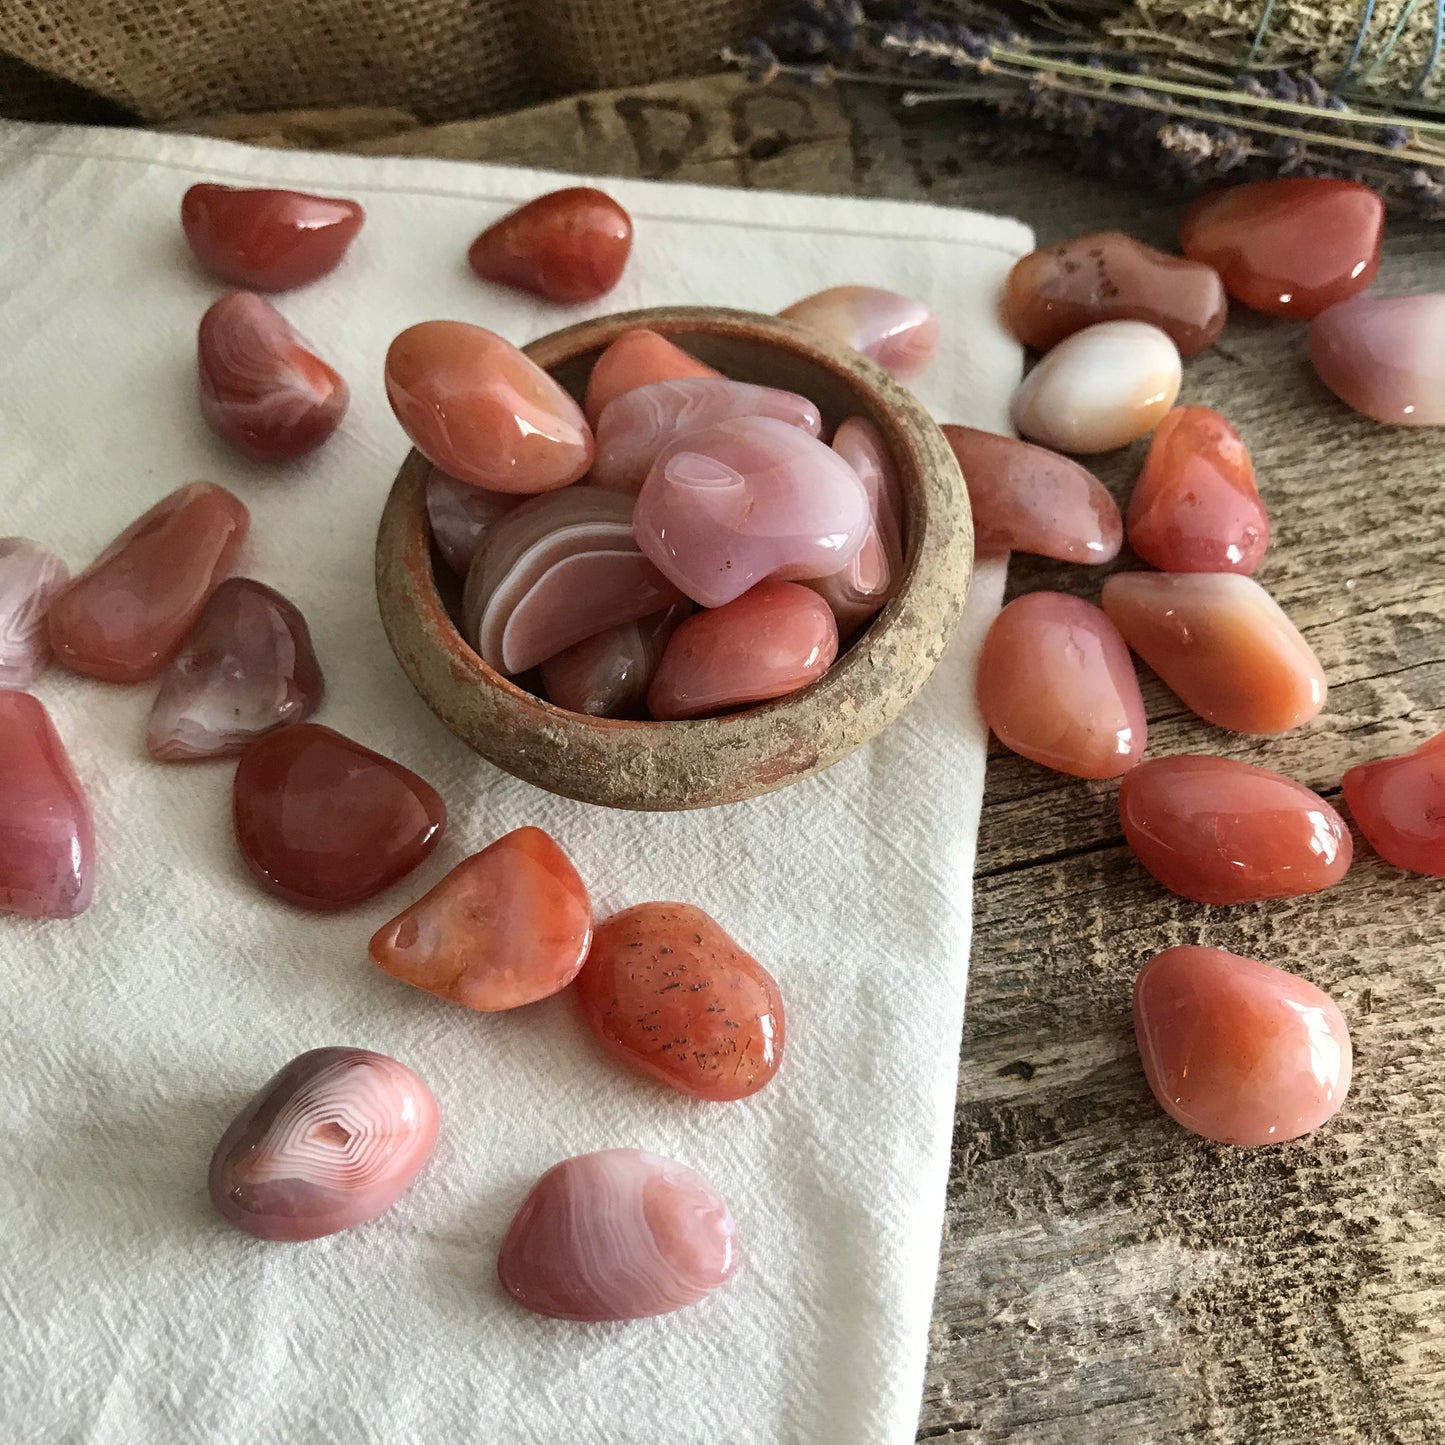 Peach Botzwana Agate Tumbled Polished (Approx. 3/4" - 1") Polished Stone for Crystal Grid, Wire Wrapping or Craft Supply BIN-1346